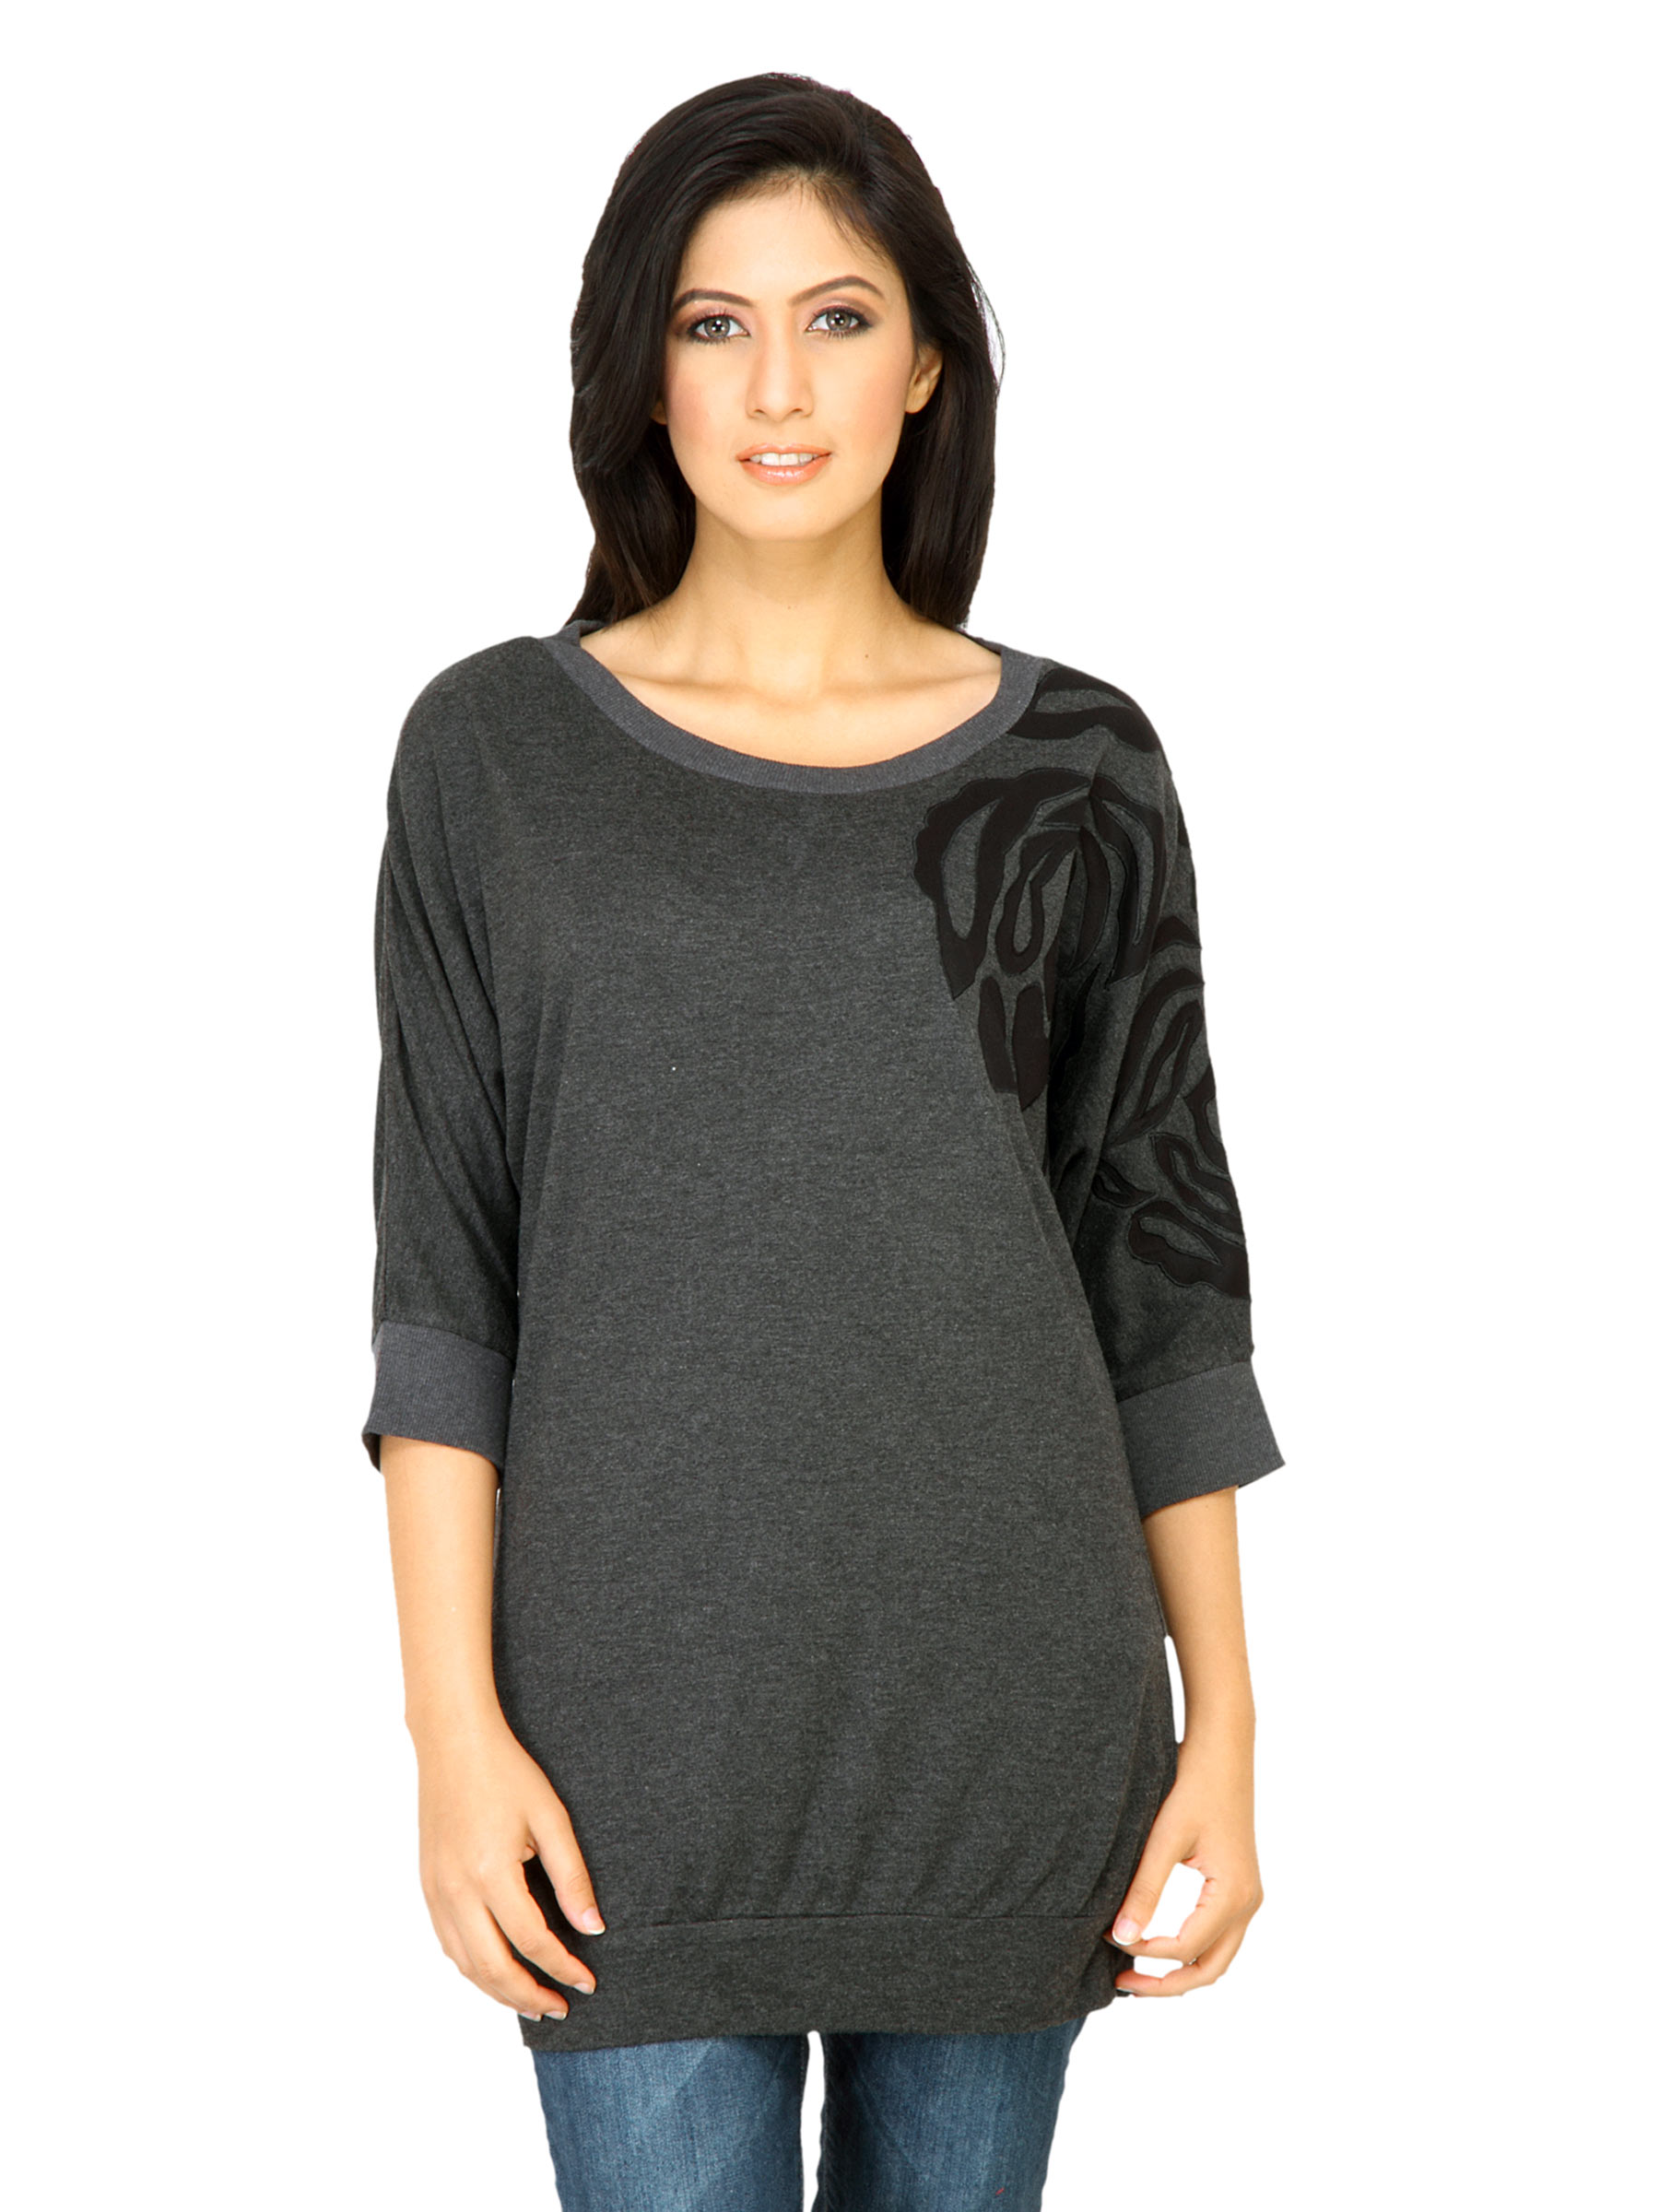 United Colors of Benetton Women Solid Grey Tops